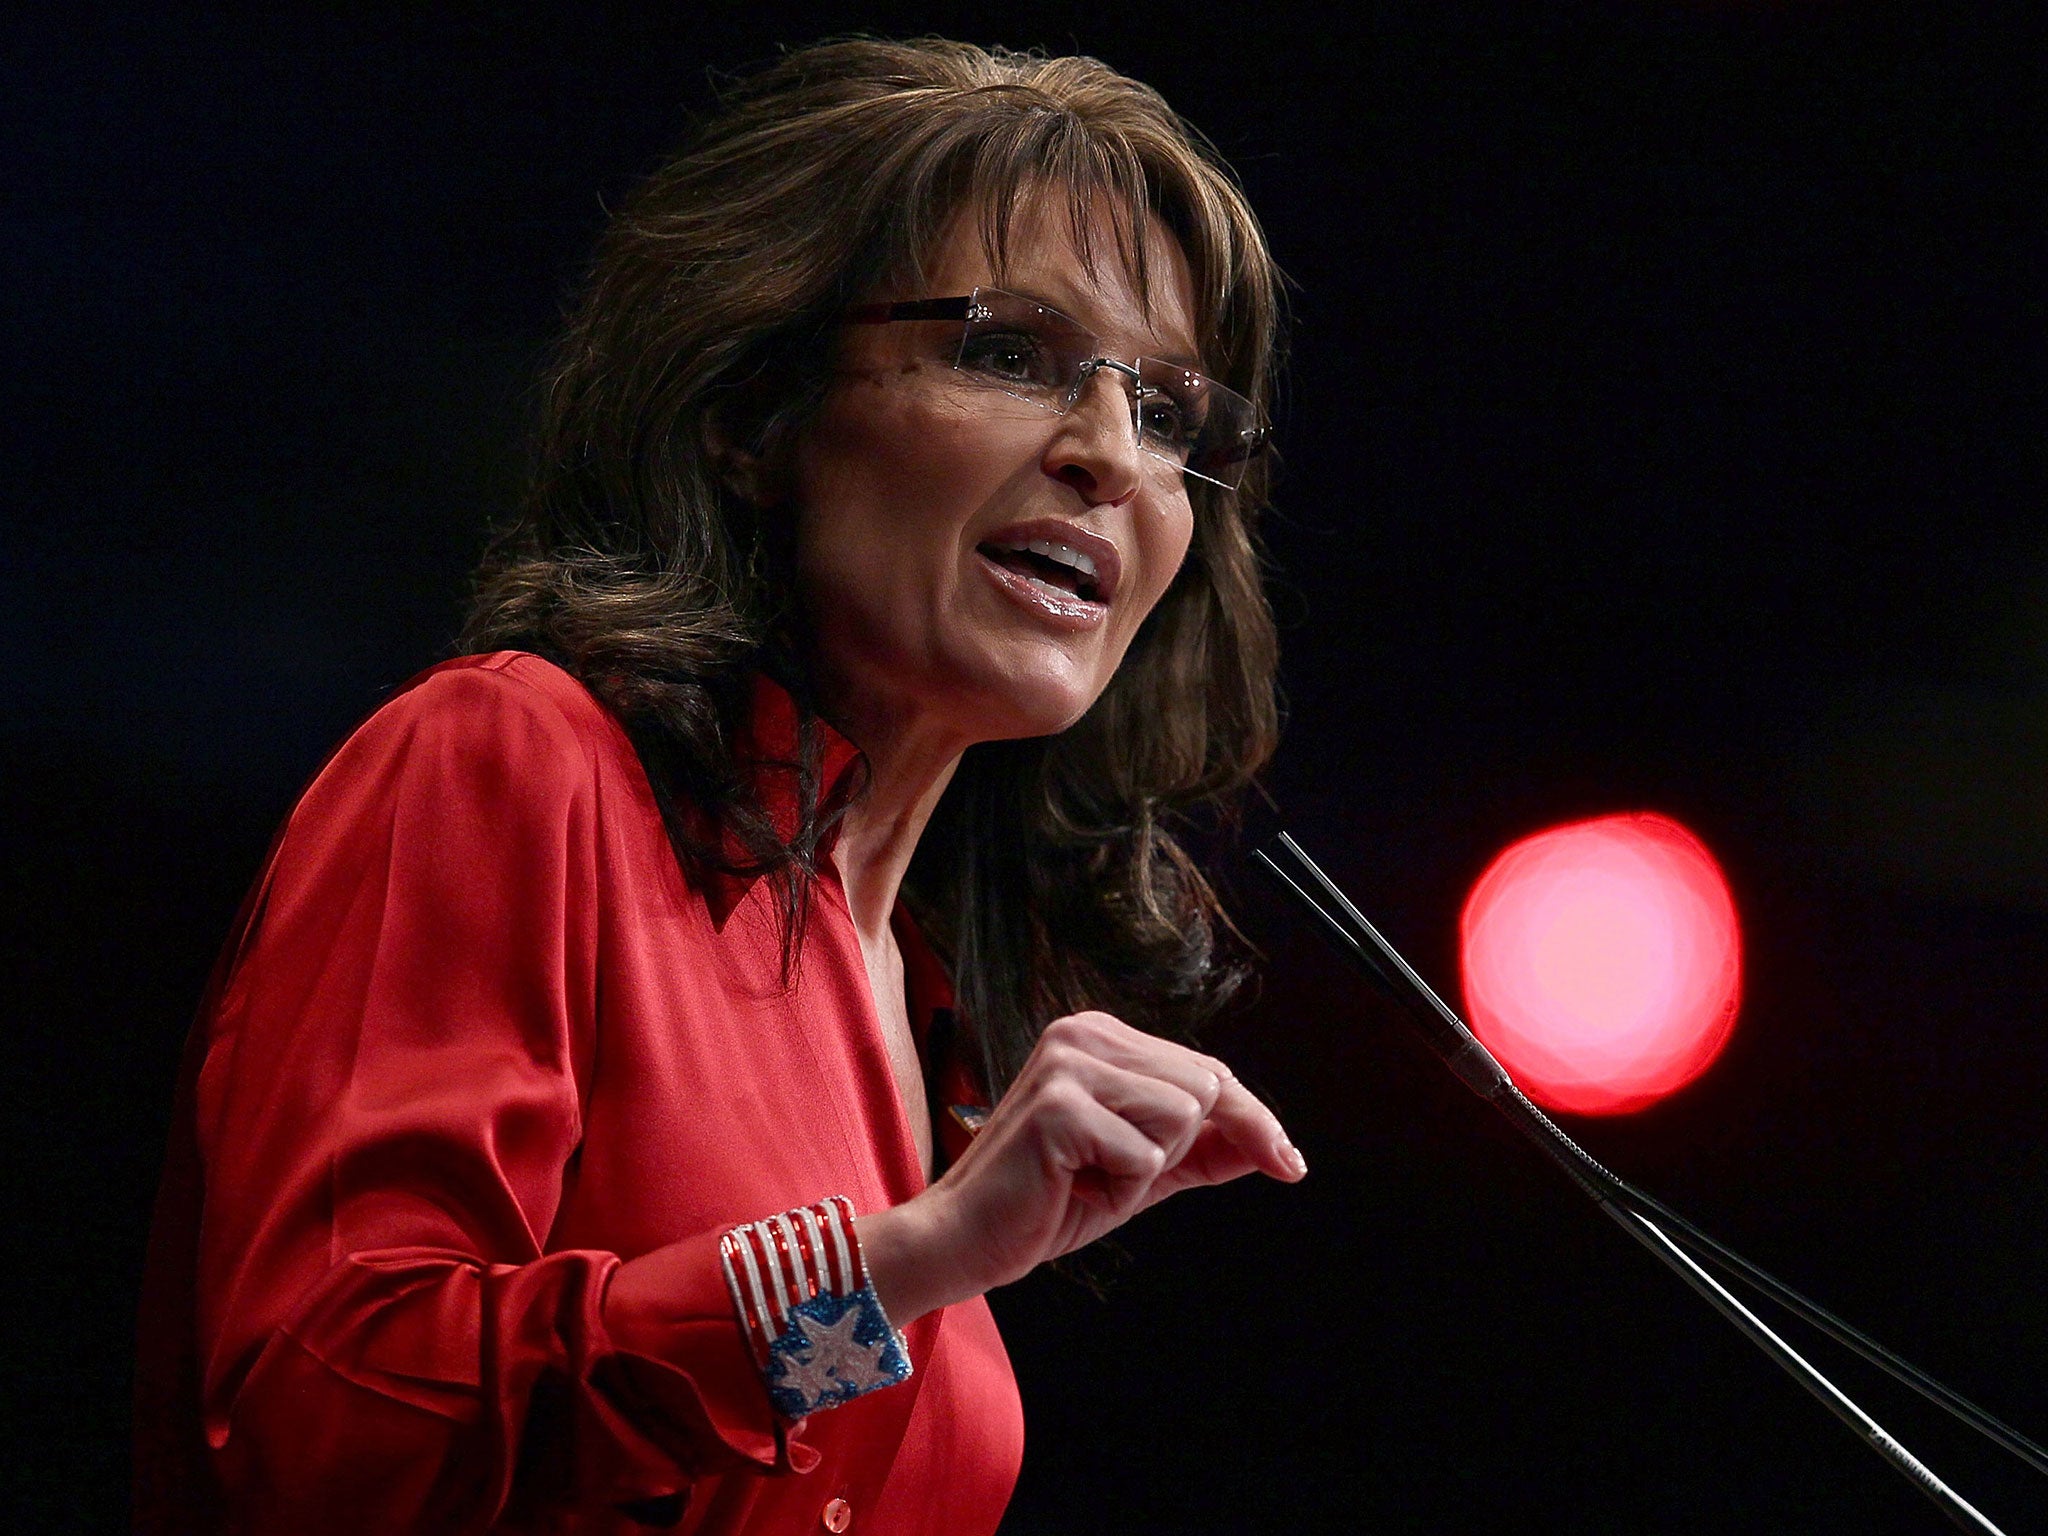 Sarah Palin said "the many impeachable offenses of Barack Obama can no longer be ignored"